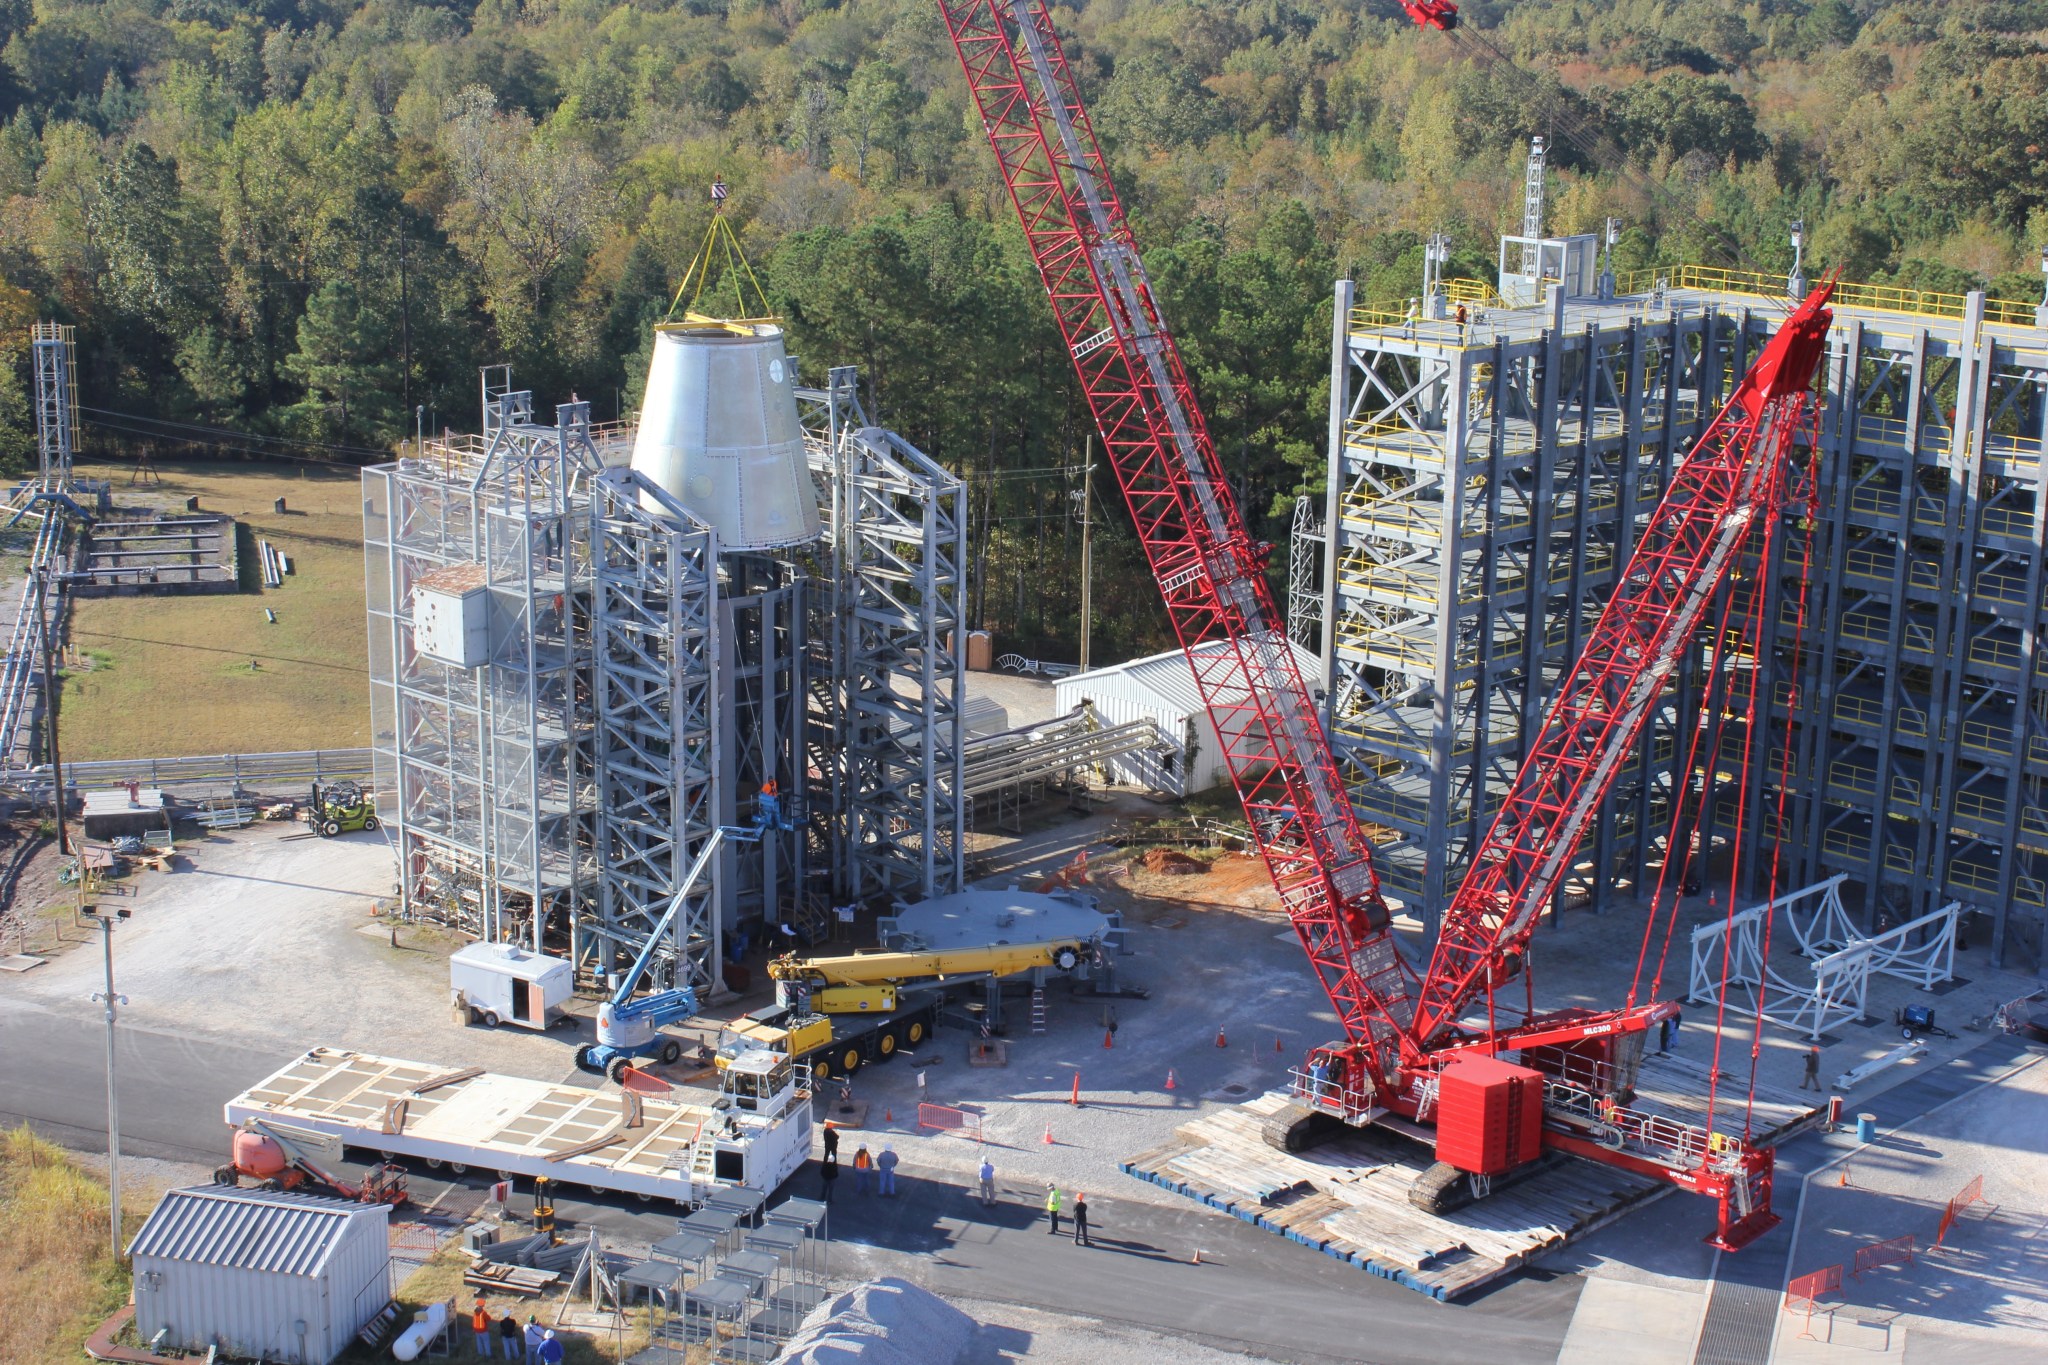 Test version of the launch vehicle stage adapter (LVSA) loaded in test stand at NASA Marshall